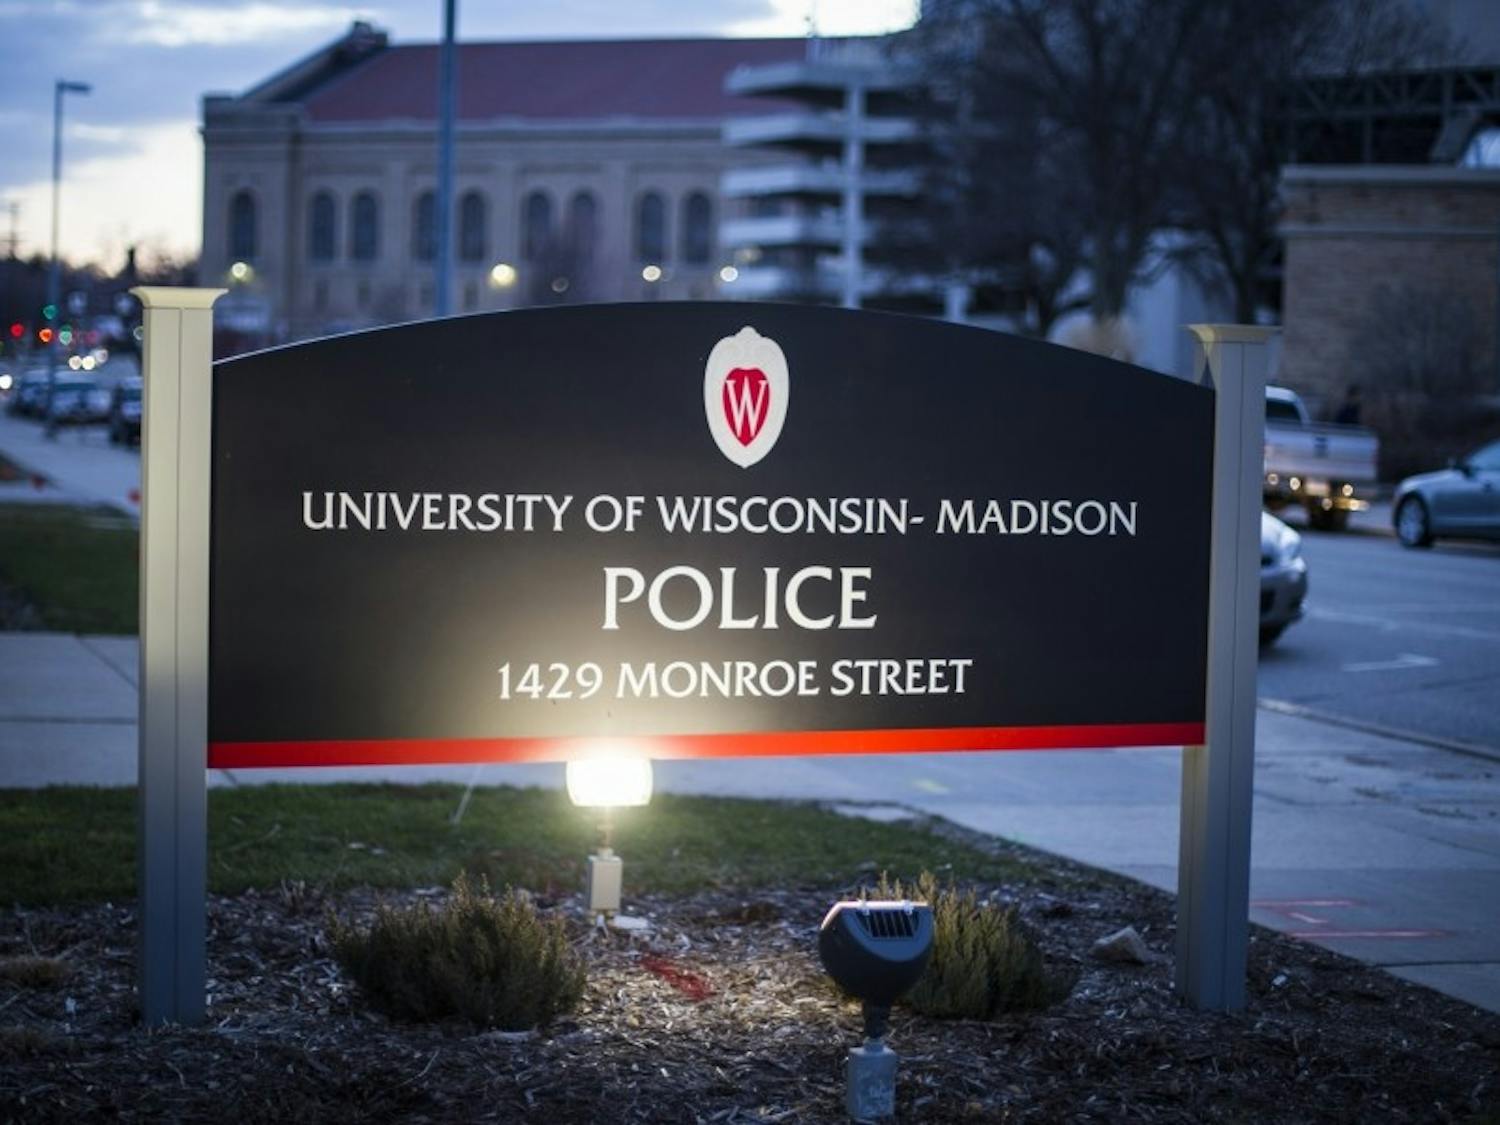 UW-Madison Police Department arrested Samuel F. Spencer on Tuesday for reported thefts at the Shell along with other crimes.